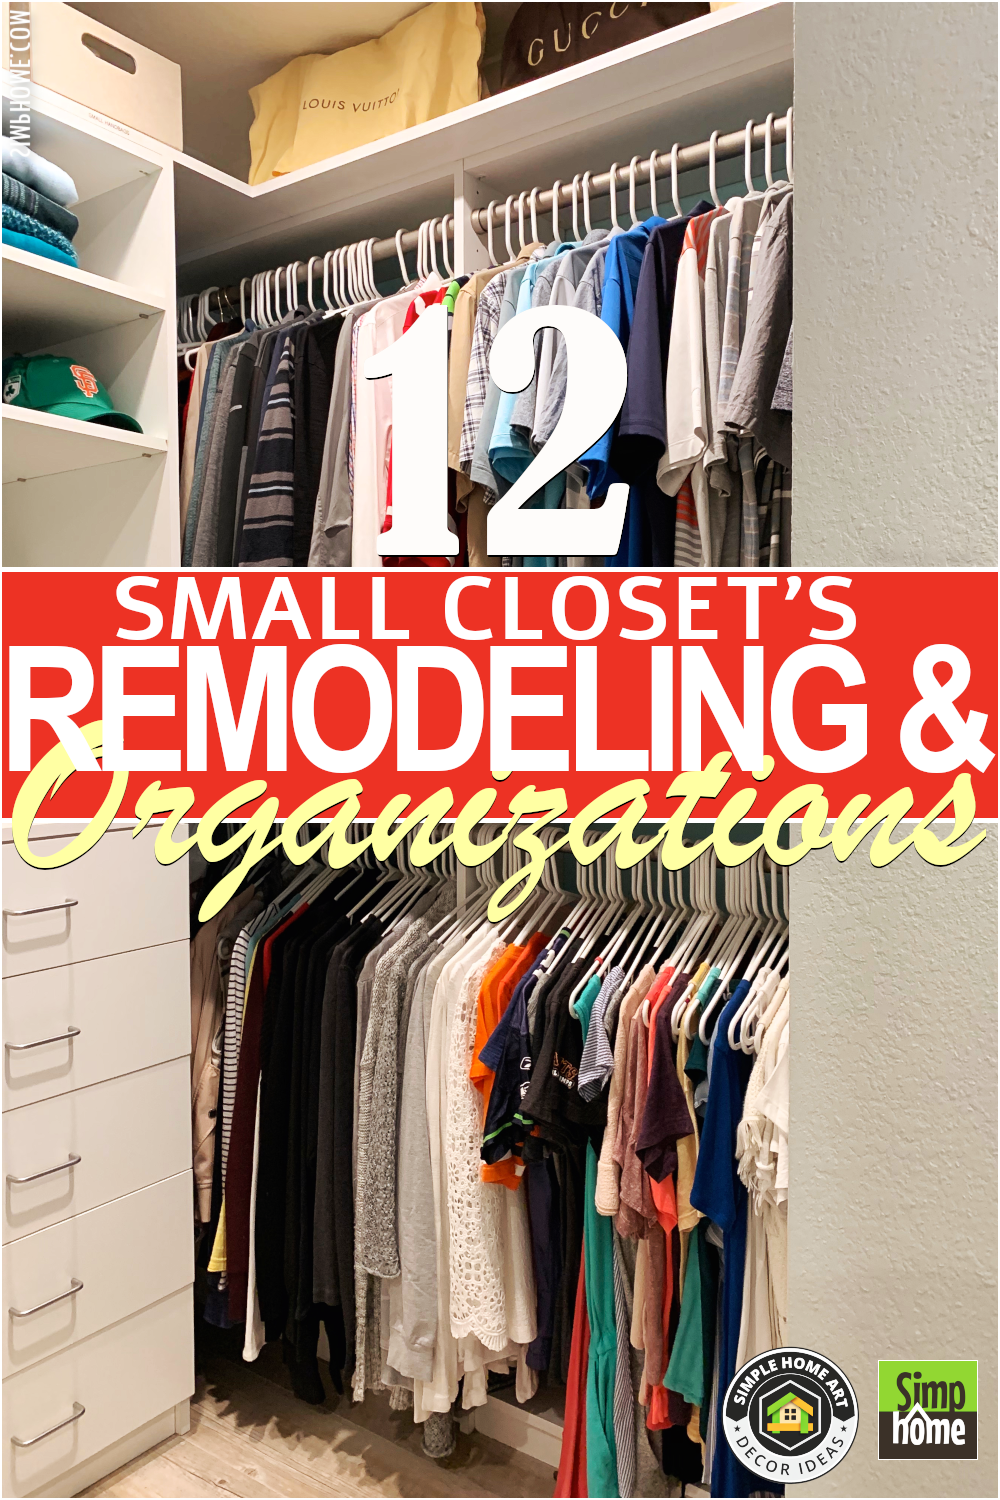 Small closet remodeling and organizations